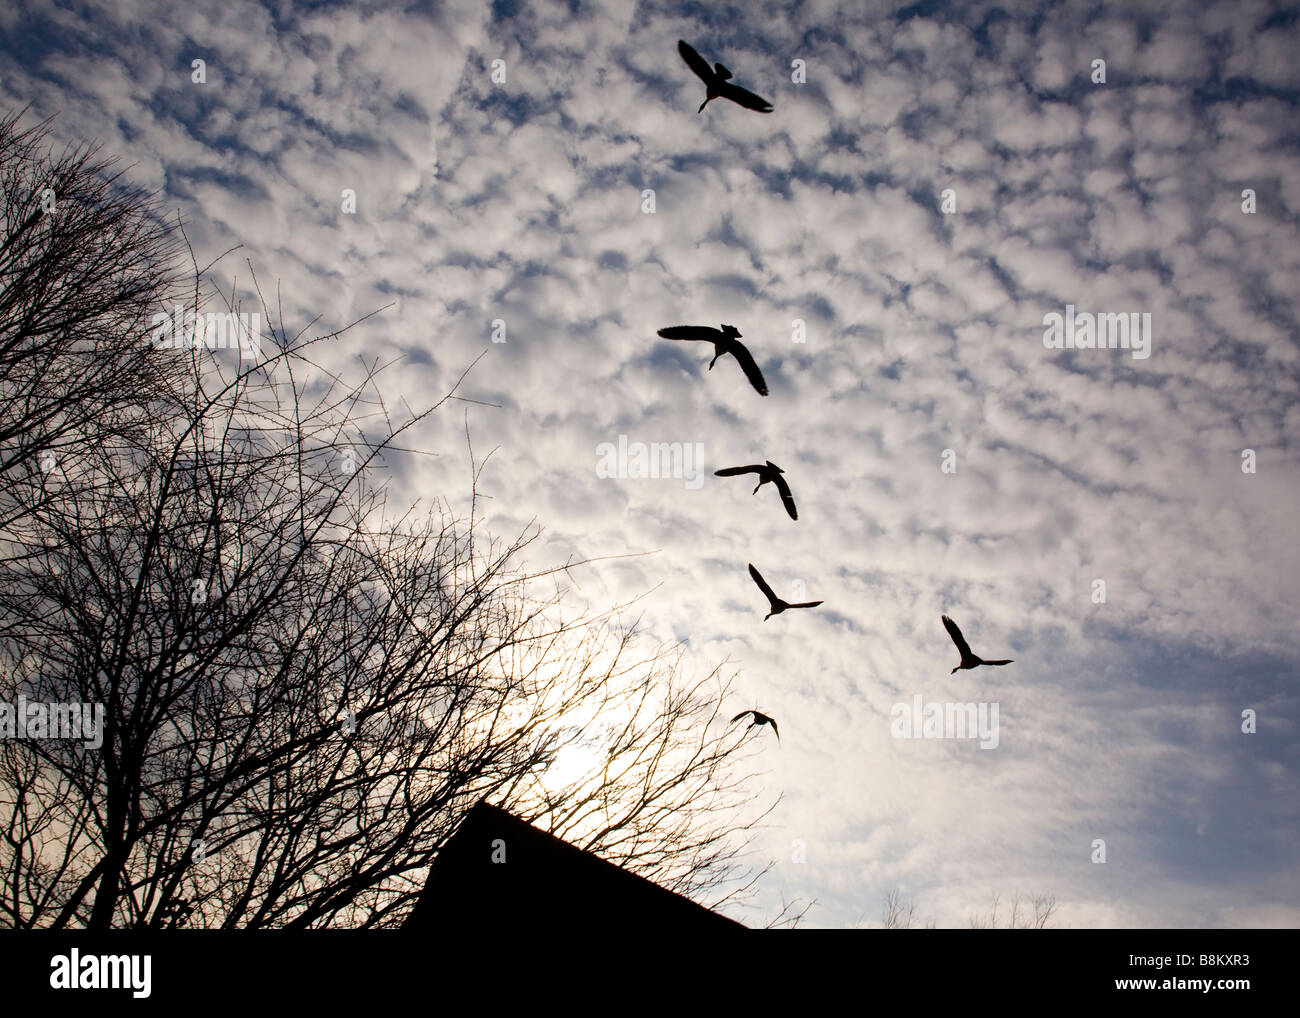 Flying geese flock under cirrocumulus clouds Stock Photo